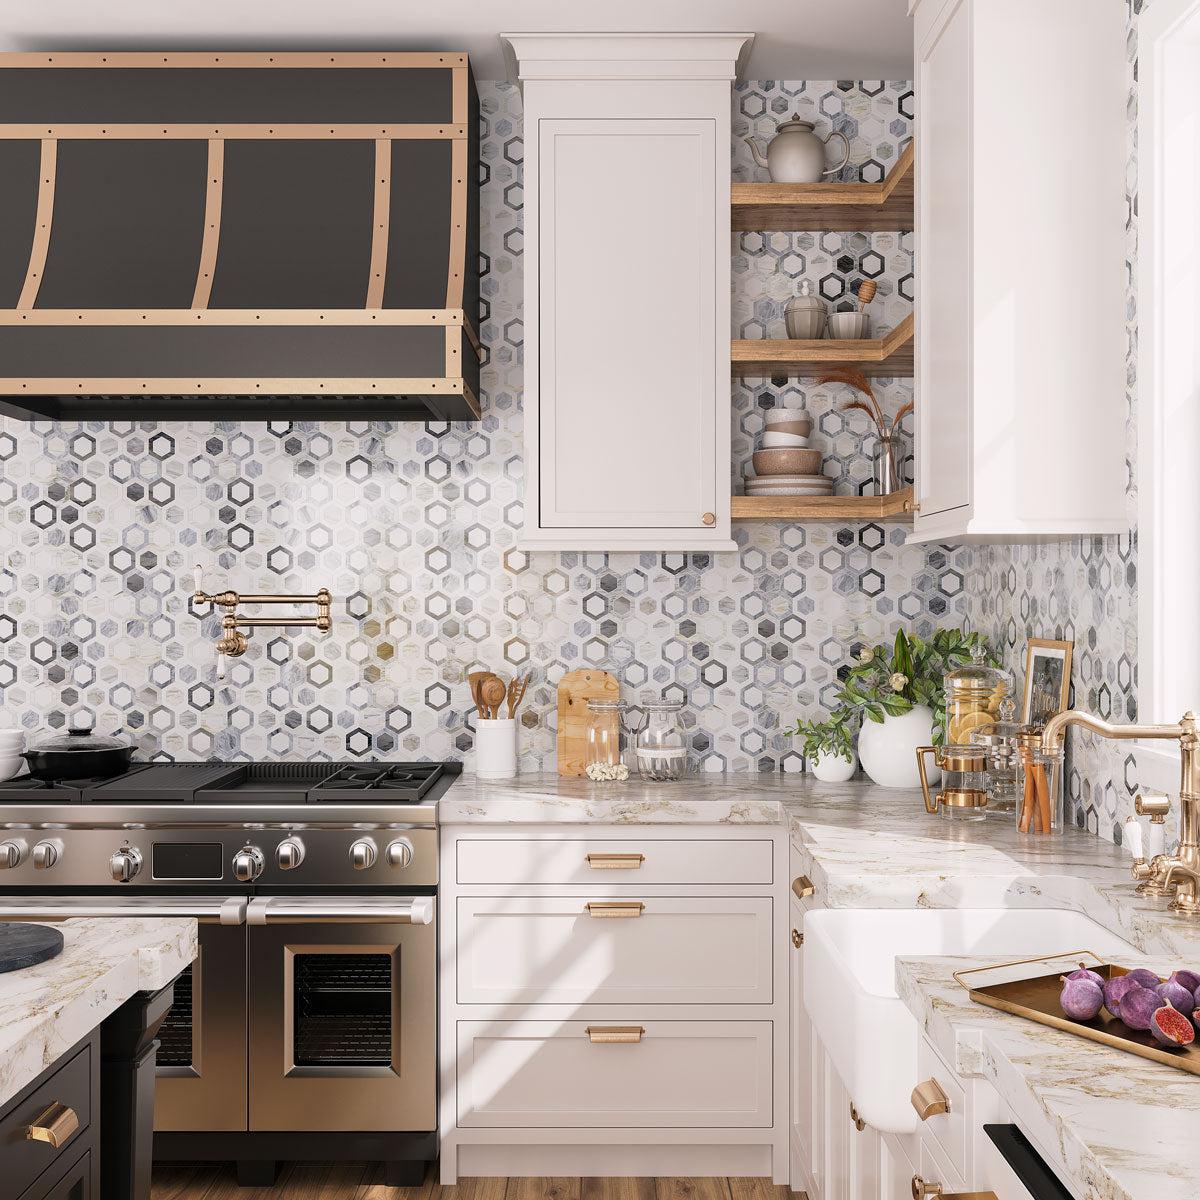 Shades of blue and white marble for a double hexagon tile backsplash for a luxury kitchen